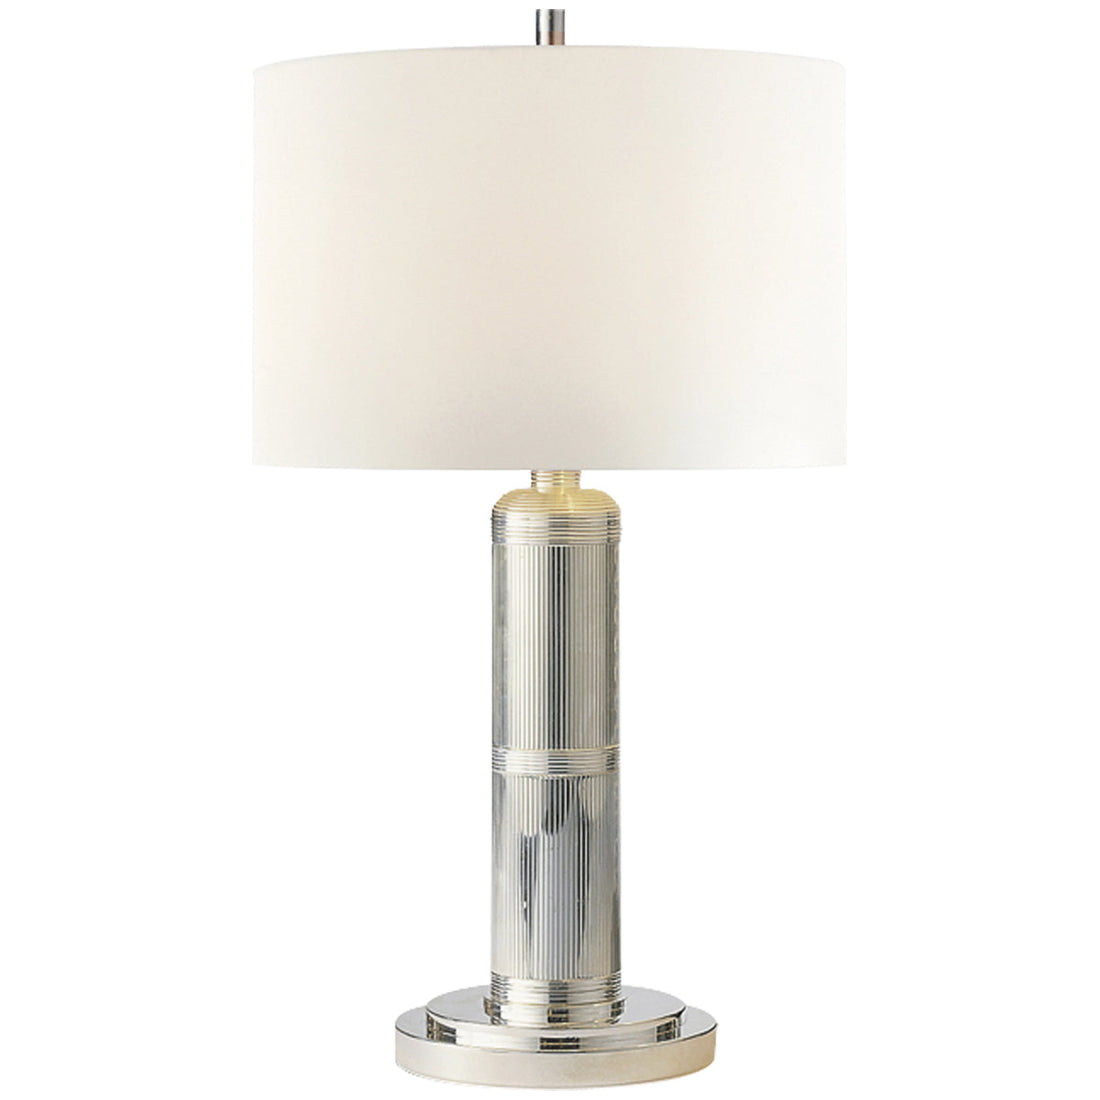 Visual Comfort Longacre Small Table Lamp with Linen Shade